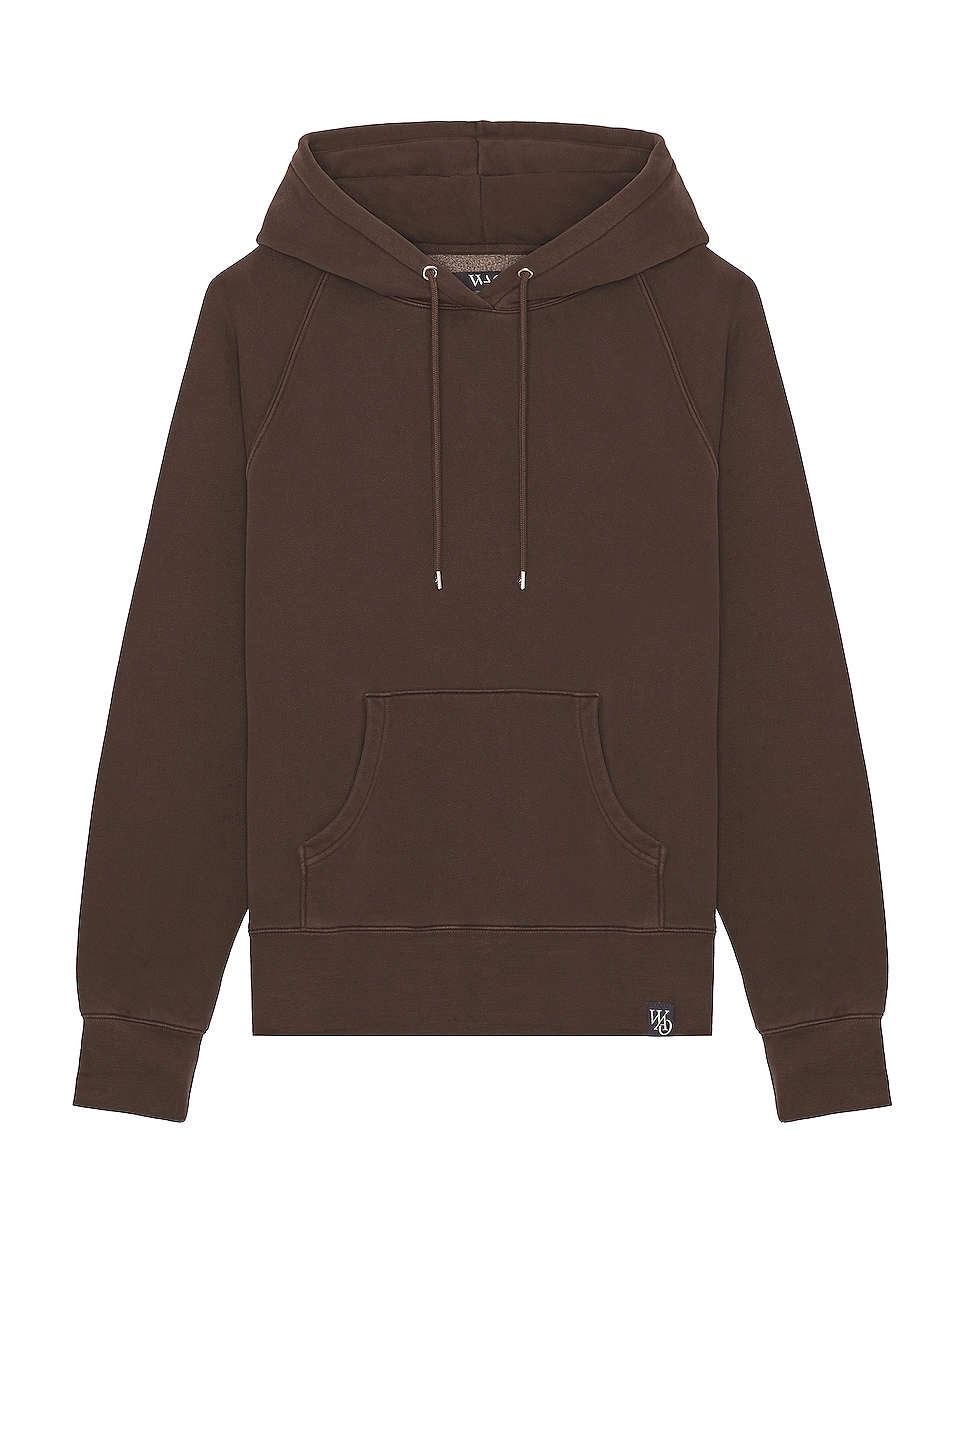 Image 1 of WAO The Pullover Hoodie in brown